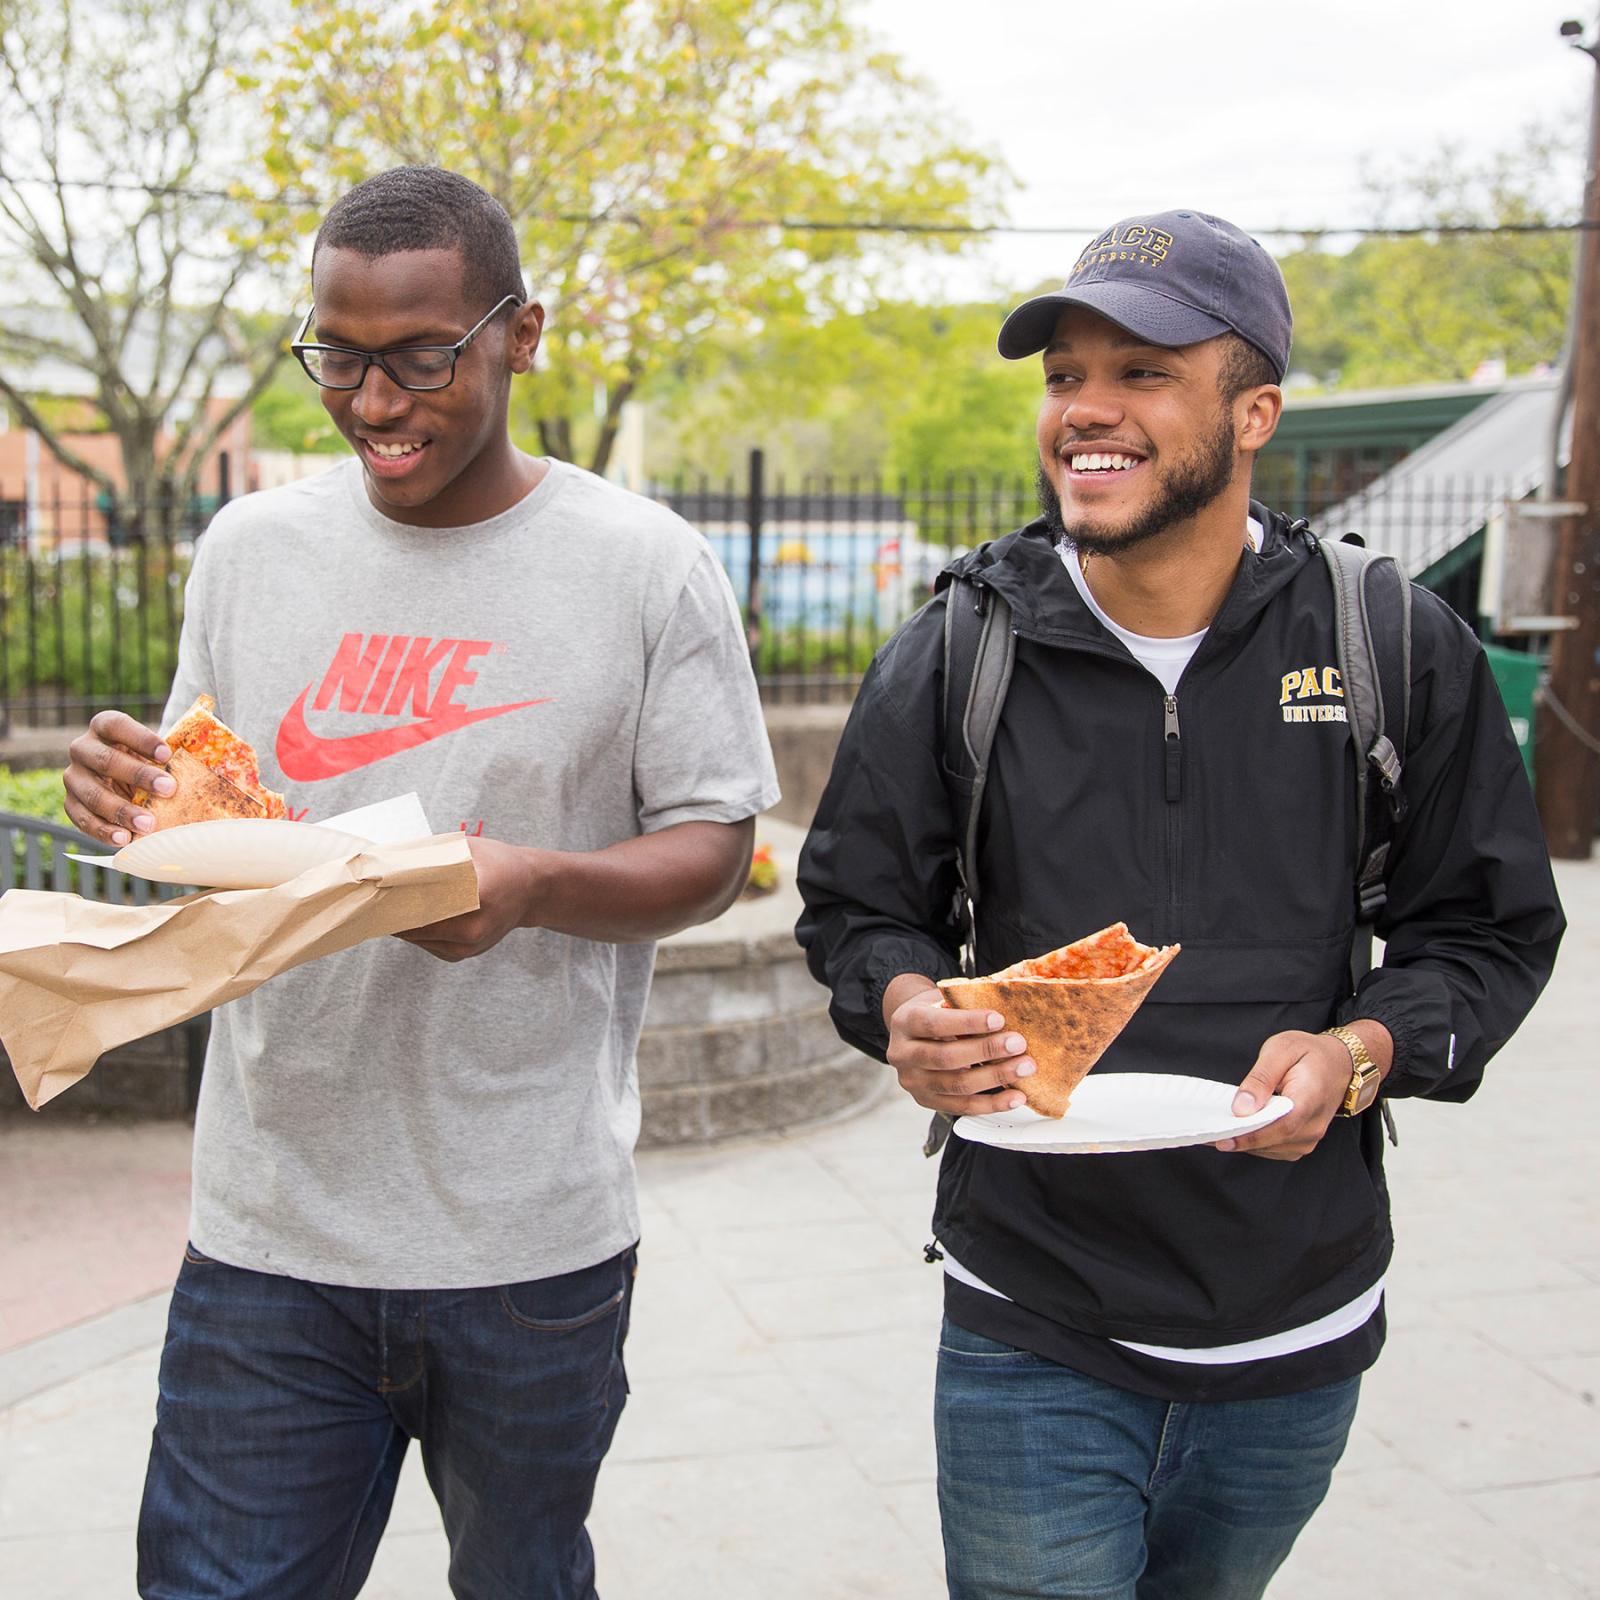 Two Pace University Students walking in the town of Pleasantville NY while eating pizza.